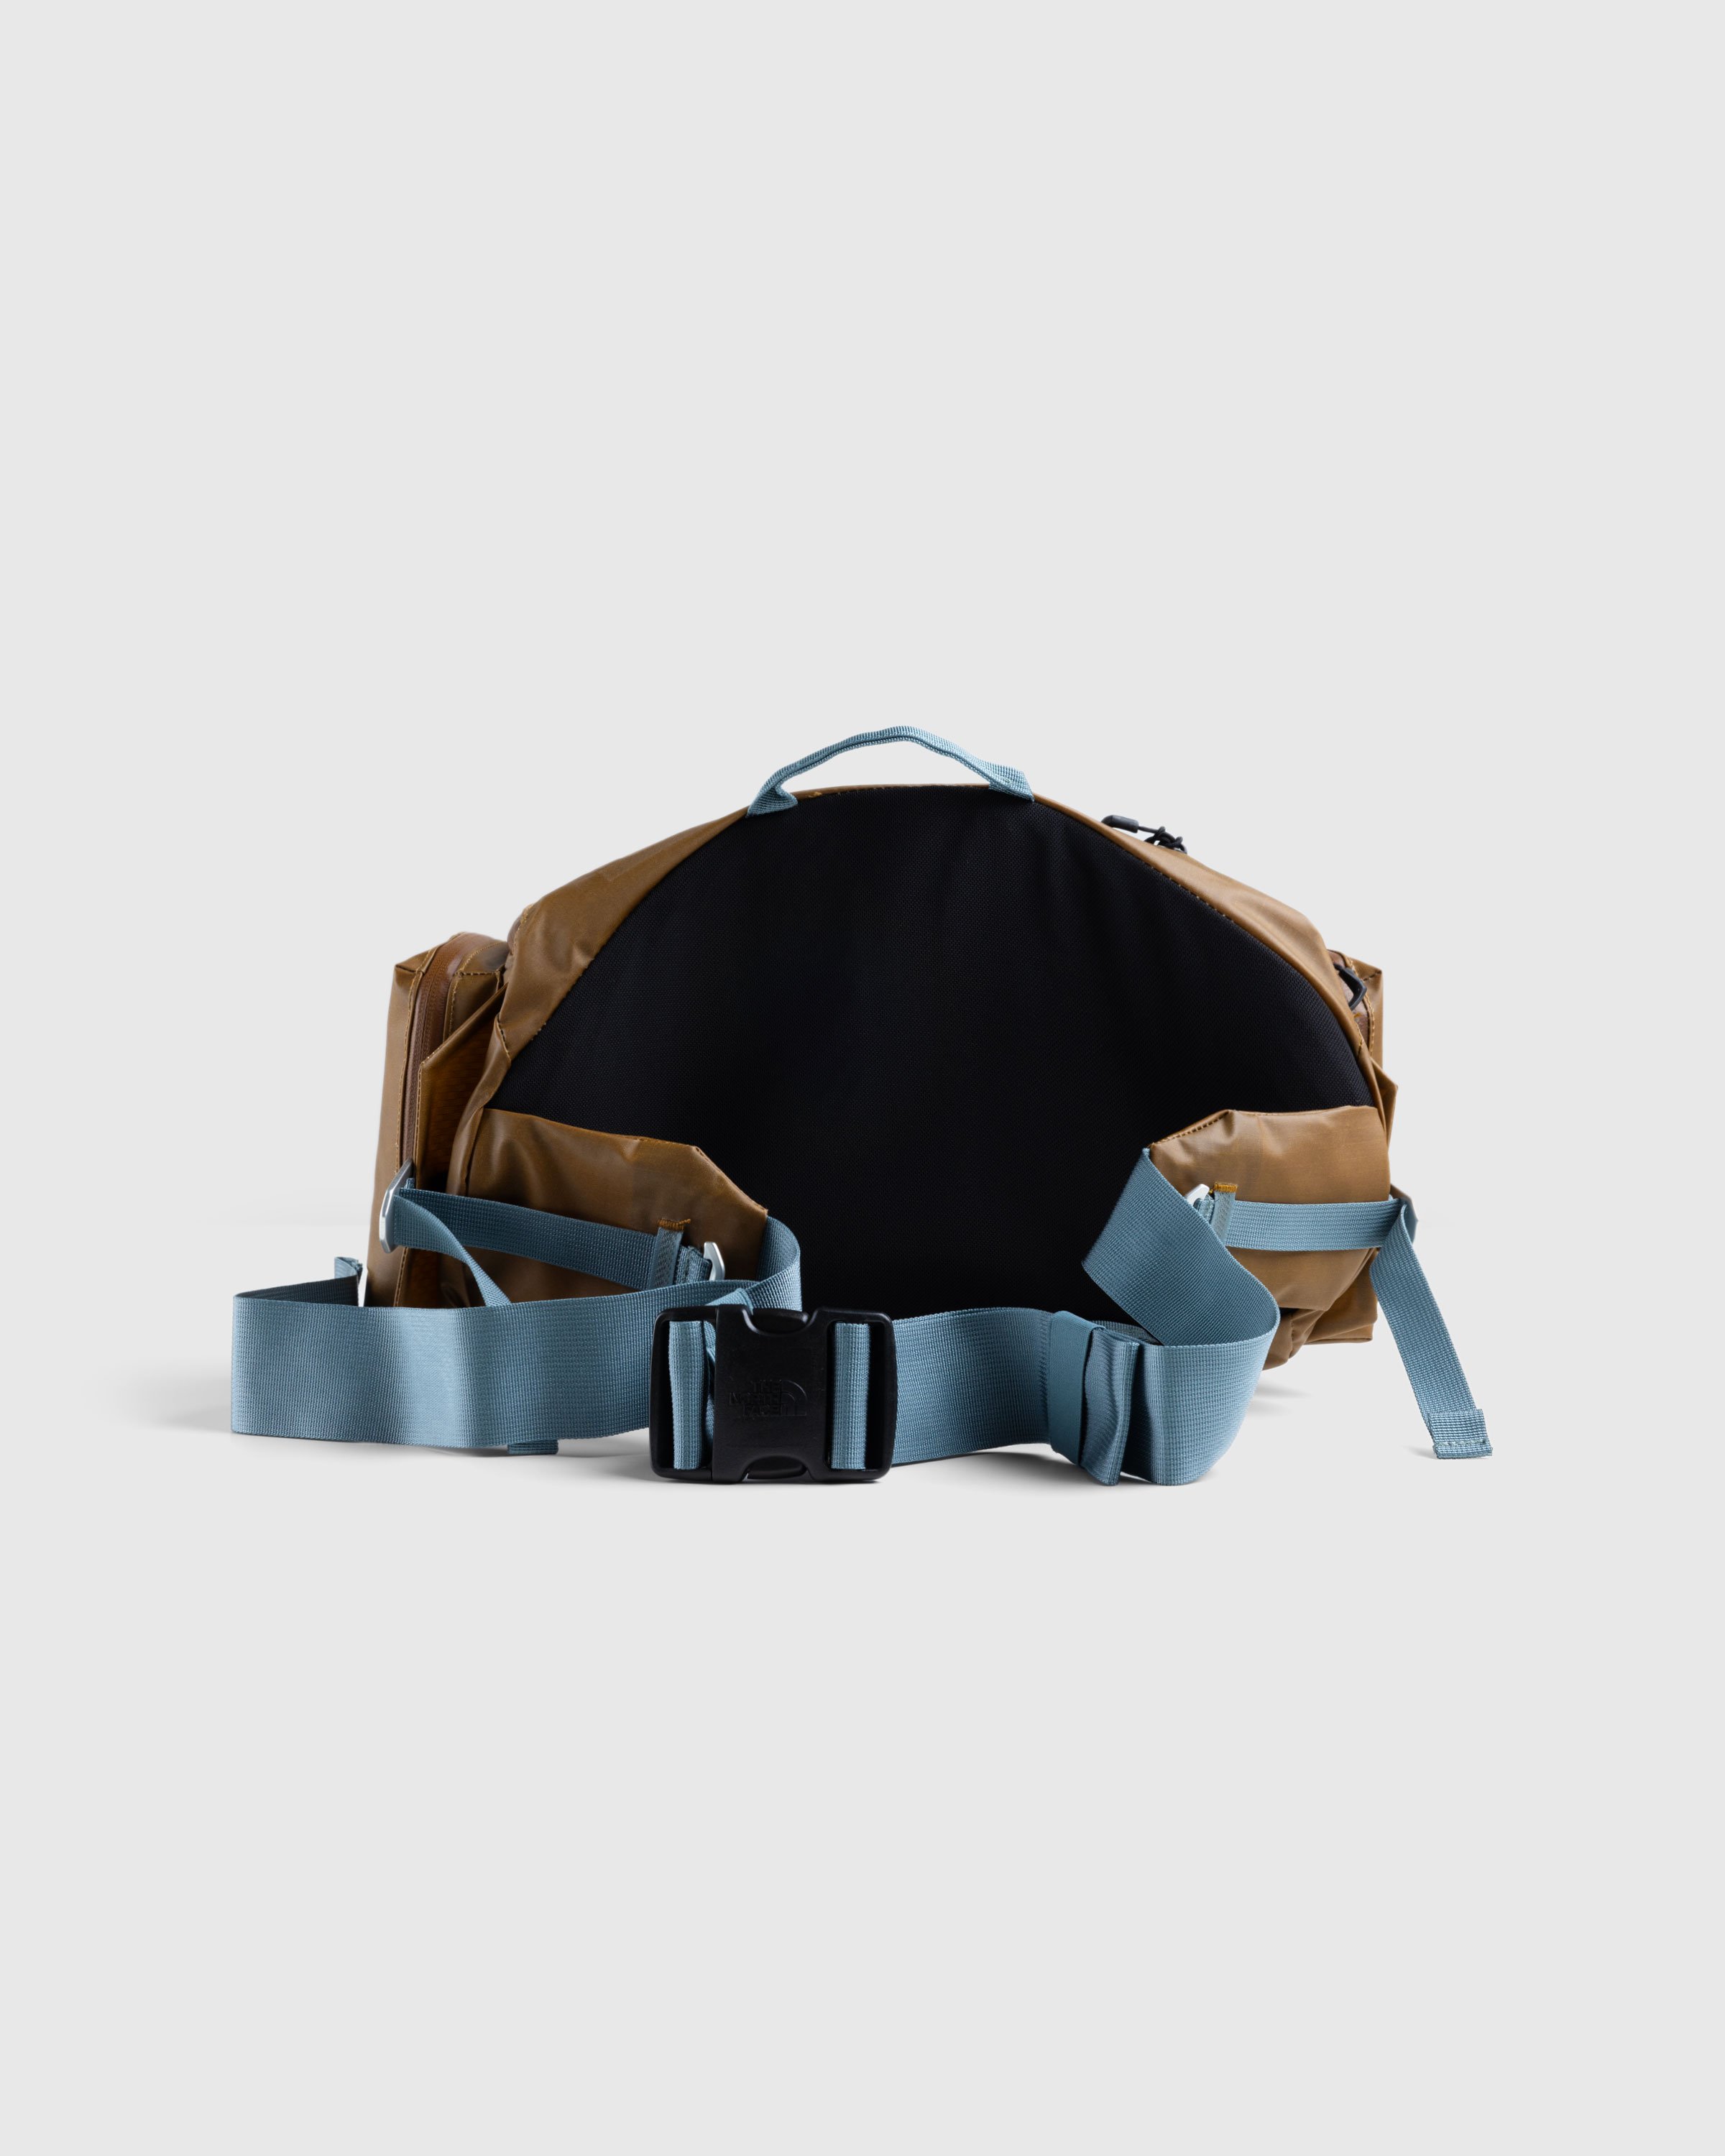 The North Face x UNDERCOVER - Soukuu Waistpack Bronze Brown/Concrete Gray - Accessories - Multi - Image 2